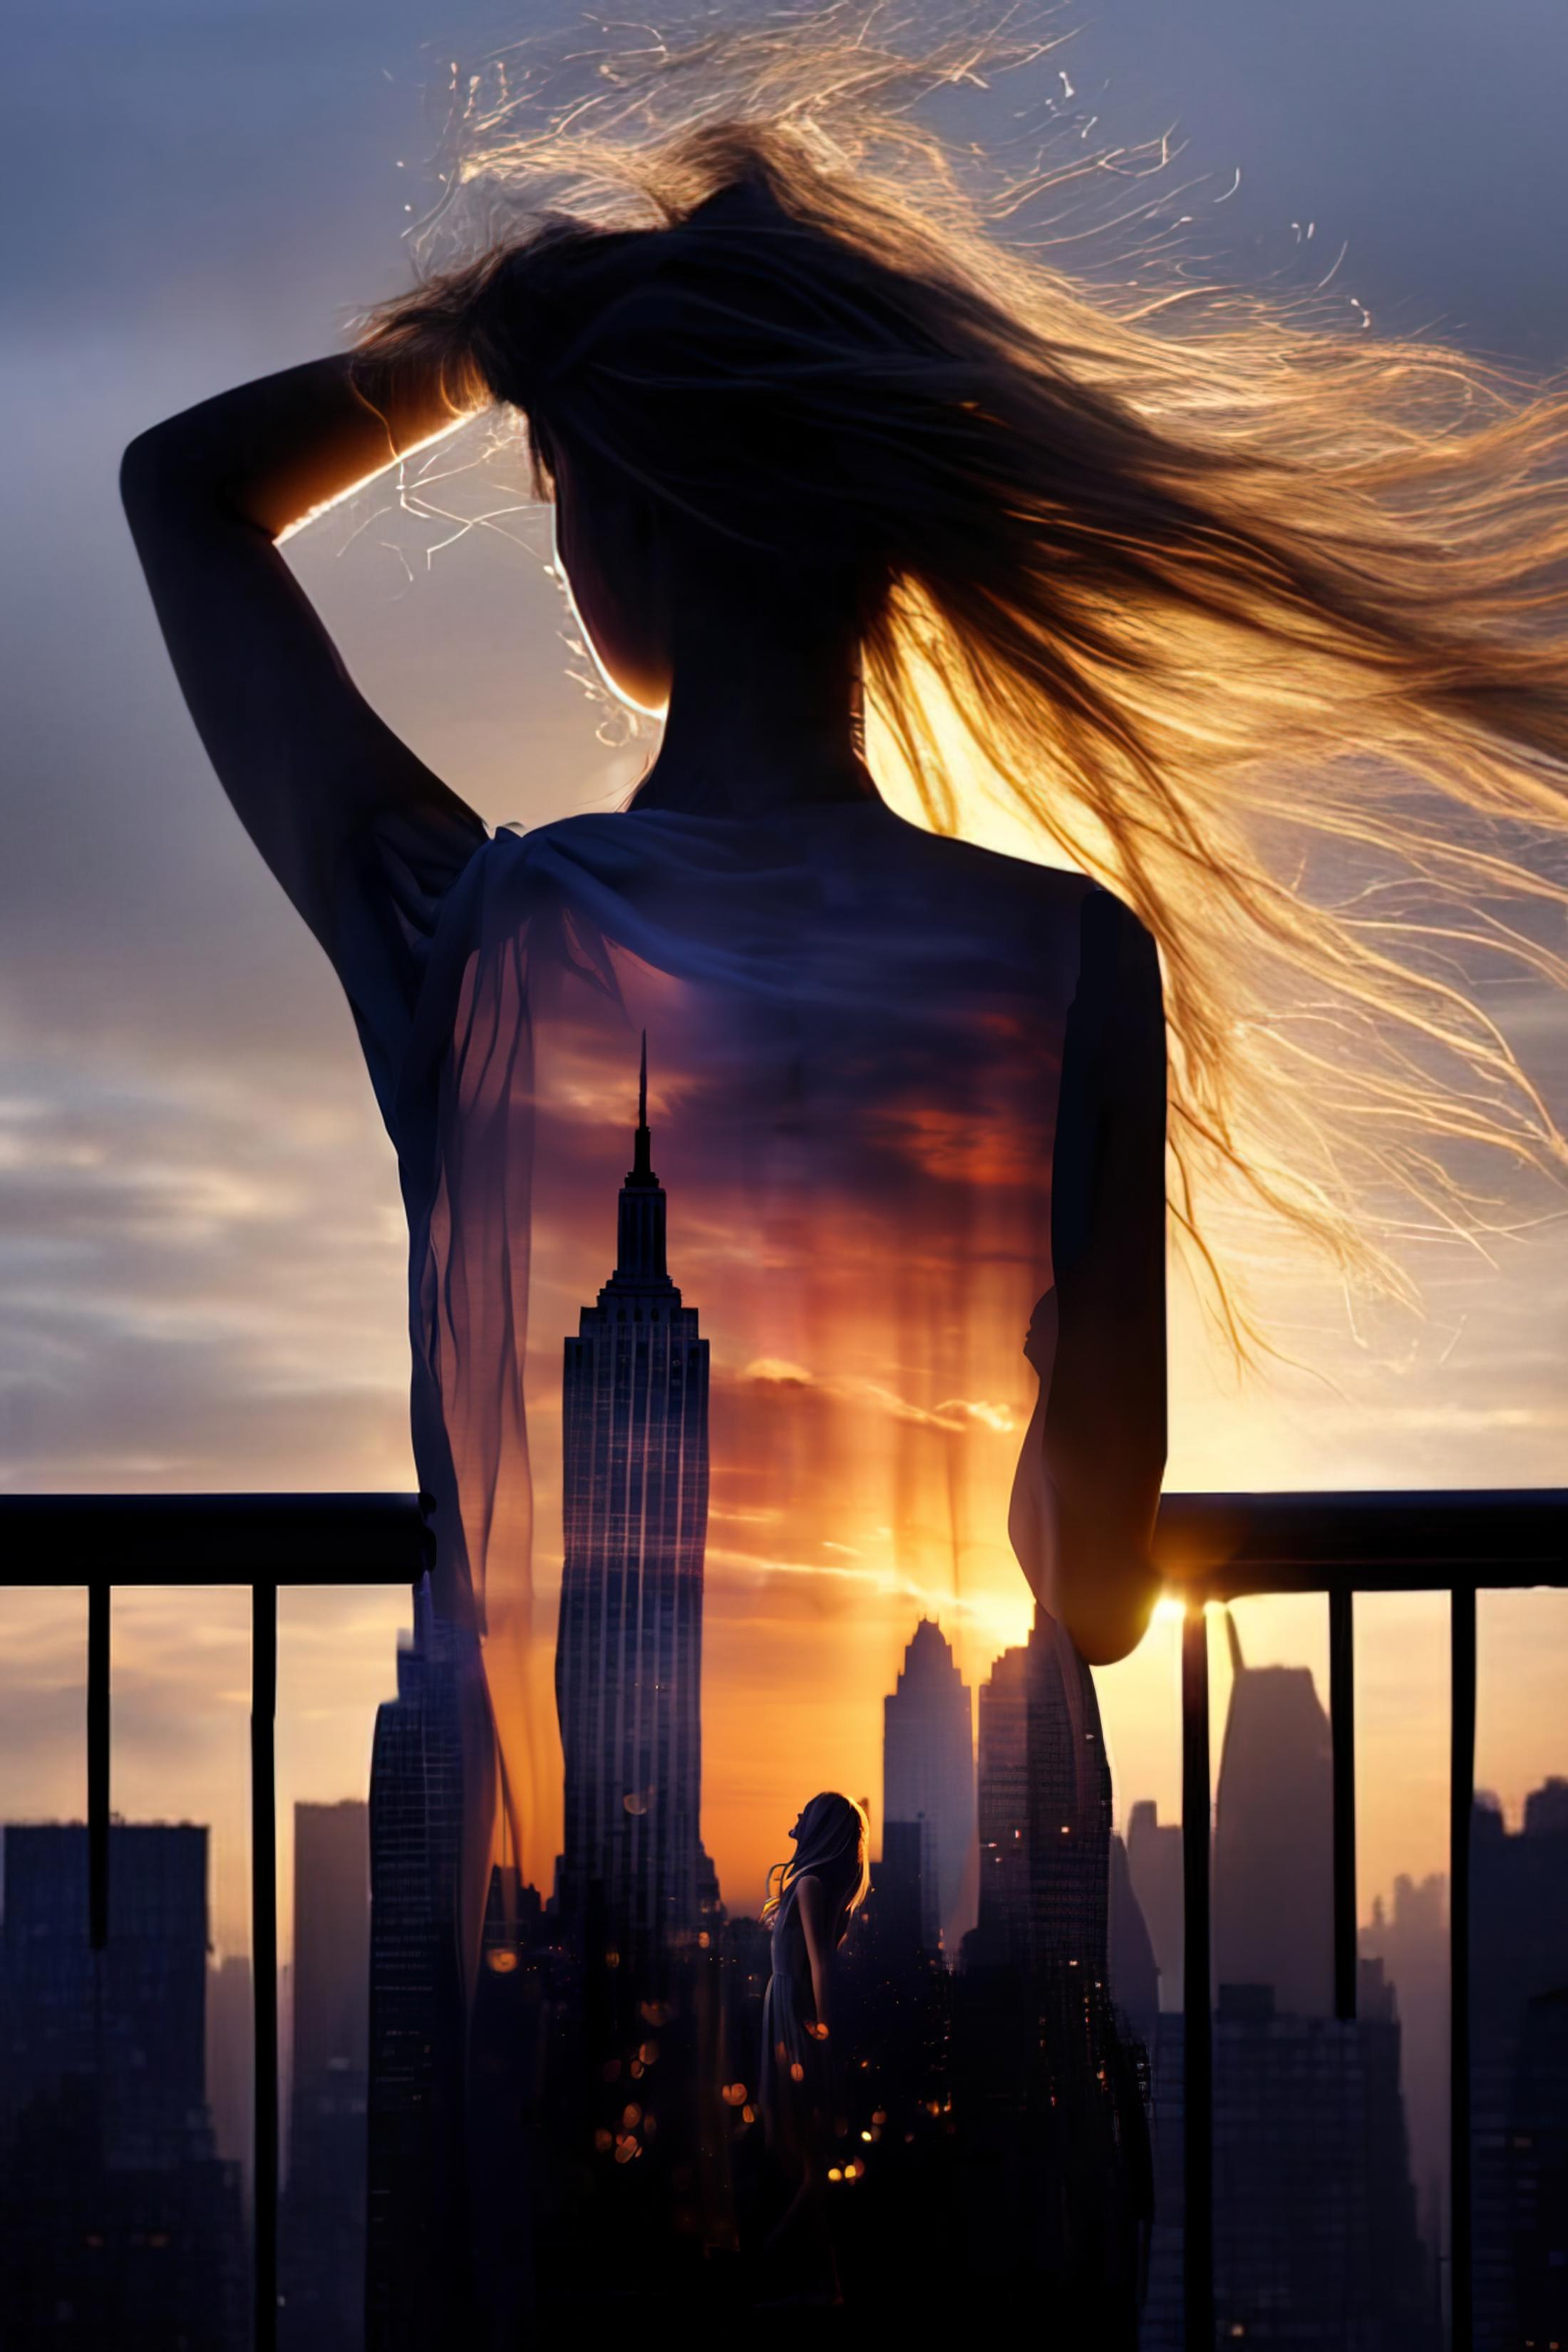 A woman standing on a balcony with the city skyline in the background.